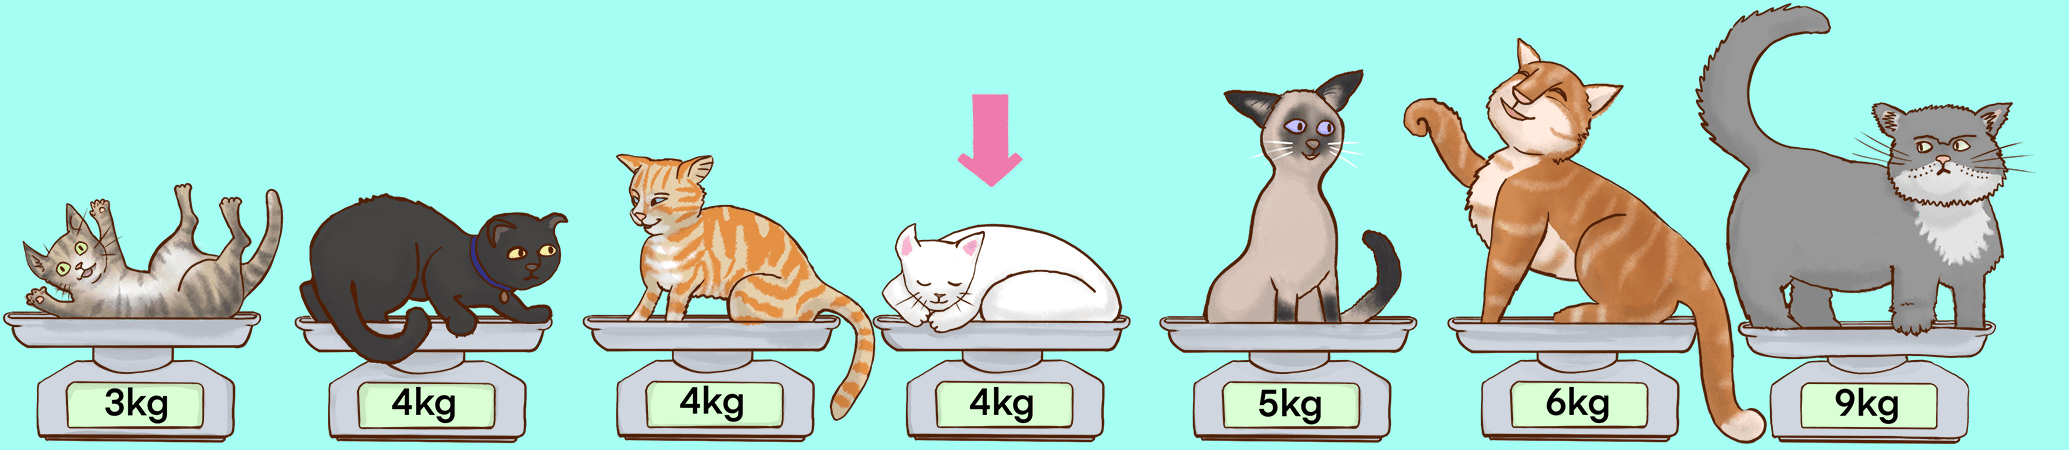 Seven different cats still sitting on cats but rearranged so their weights in 
          order are 
          3kg, 4kg, 4kg, 4kg, 5kg, 6kg, 9kg.